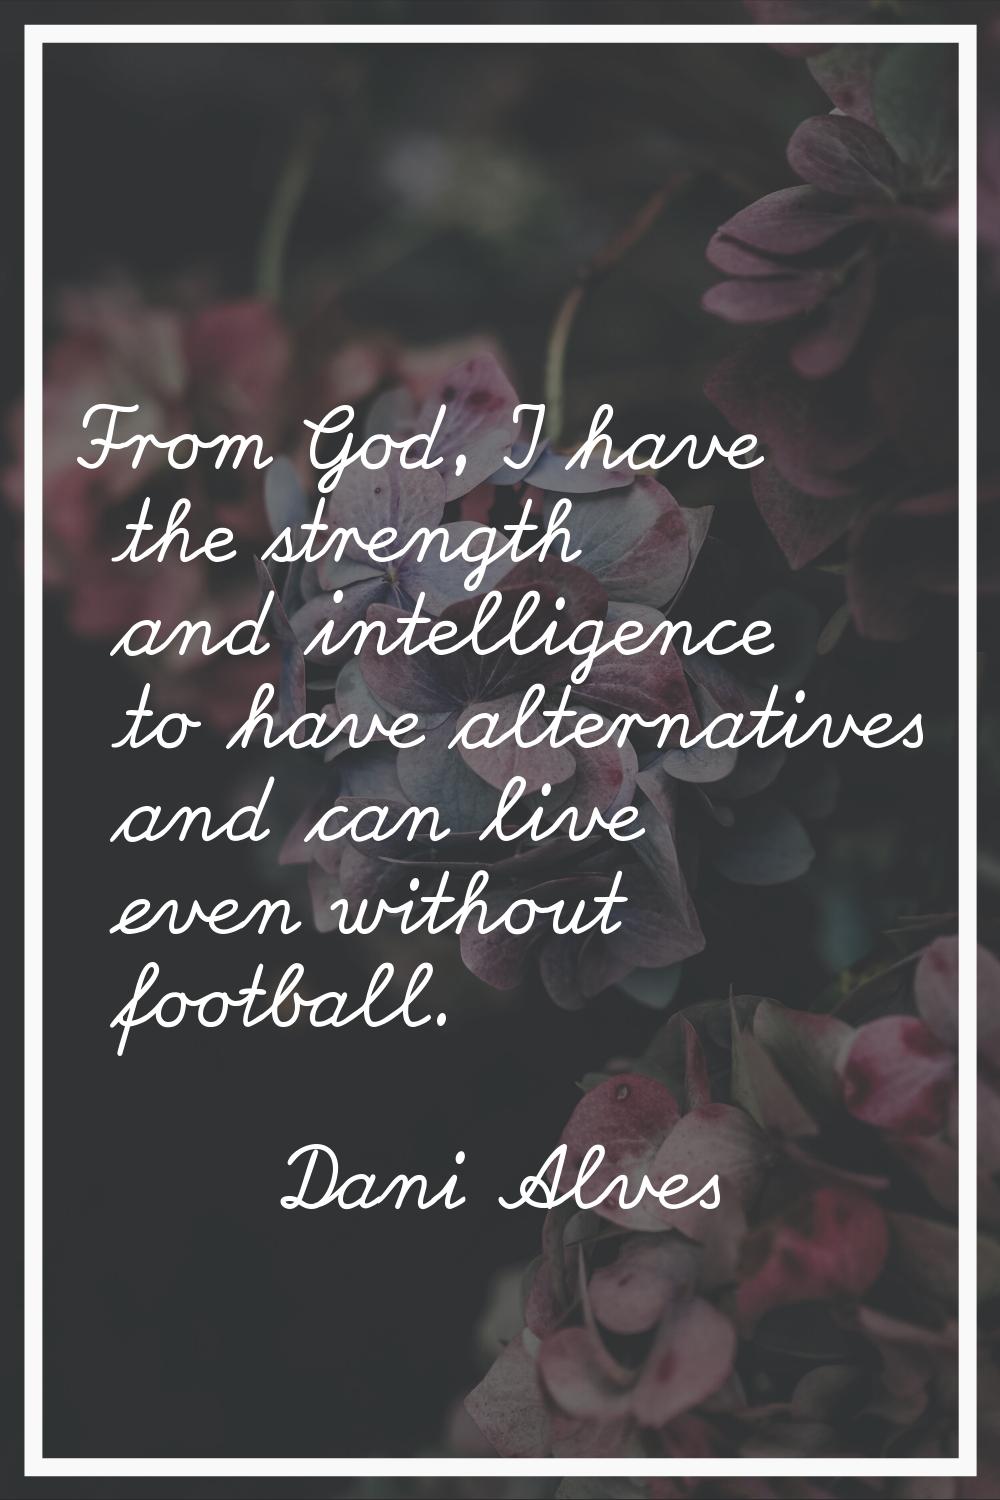 From God, I have the strength and intelligence to have alternatives and can live even without footb